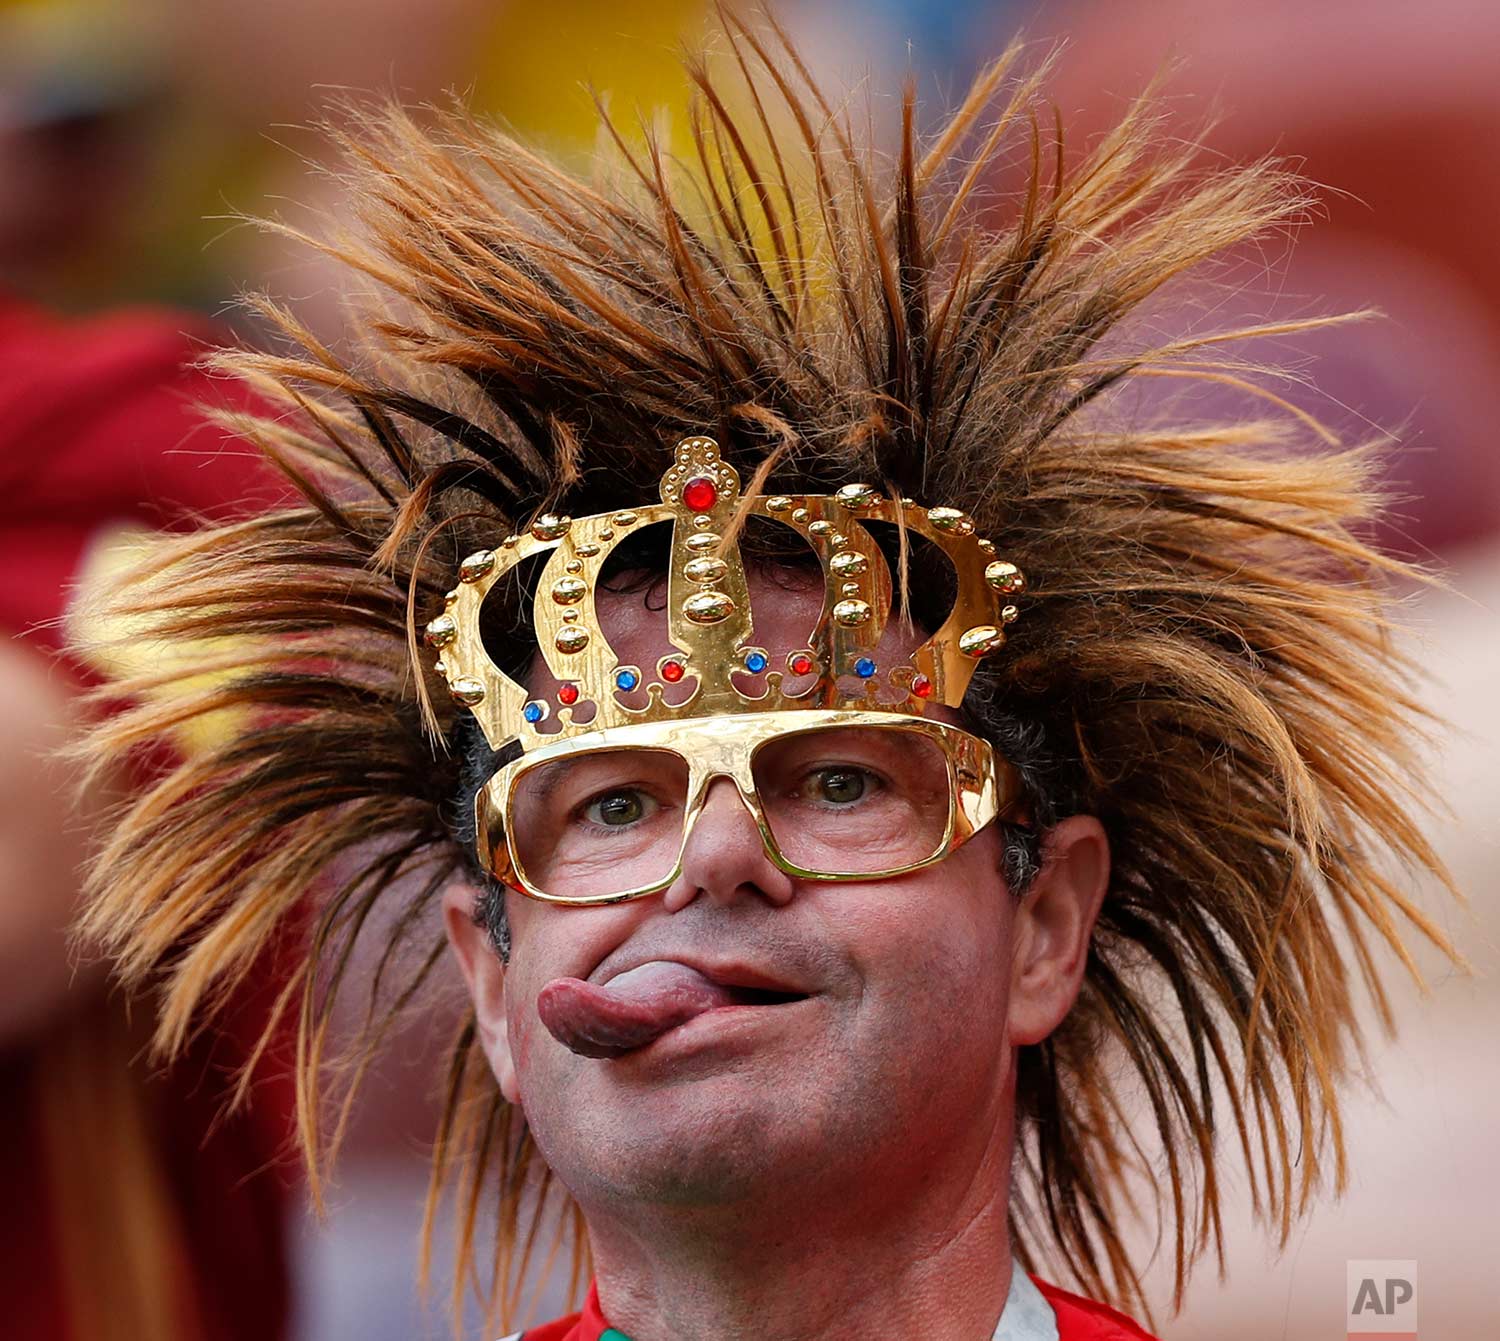  A Portugal's fan sticks his tongue out as he sits in the stands prior to the group B match between Portugal and Morocco at the 2018 soccer World Cup in the Luzhniki Stadium in Moscow, Russia, Wednesday, June 20, 2018. (AP Photo/Francisco Seco) 